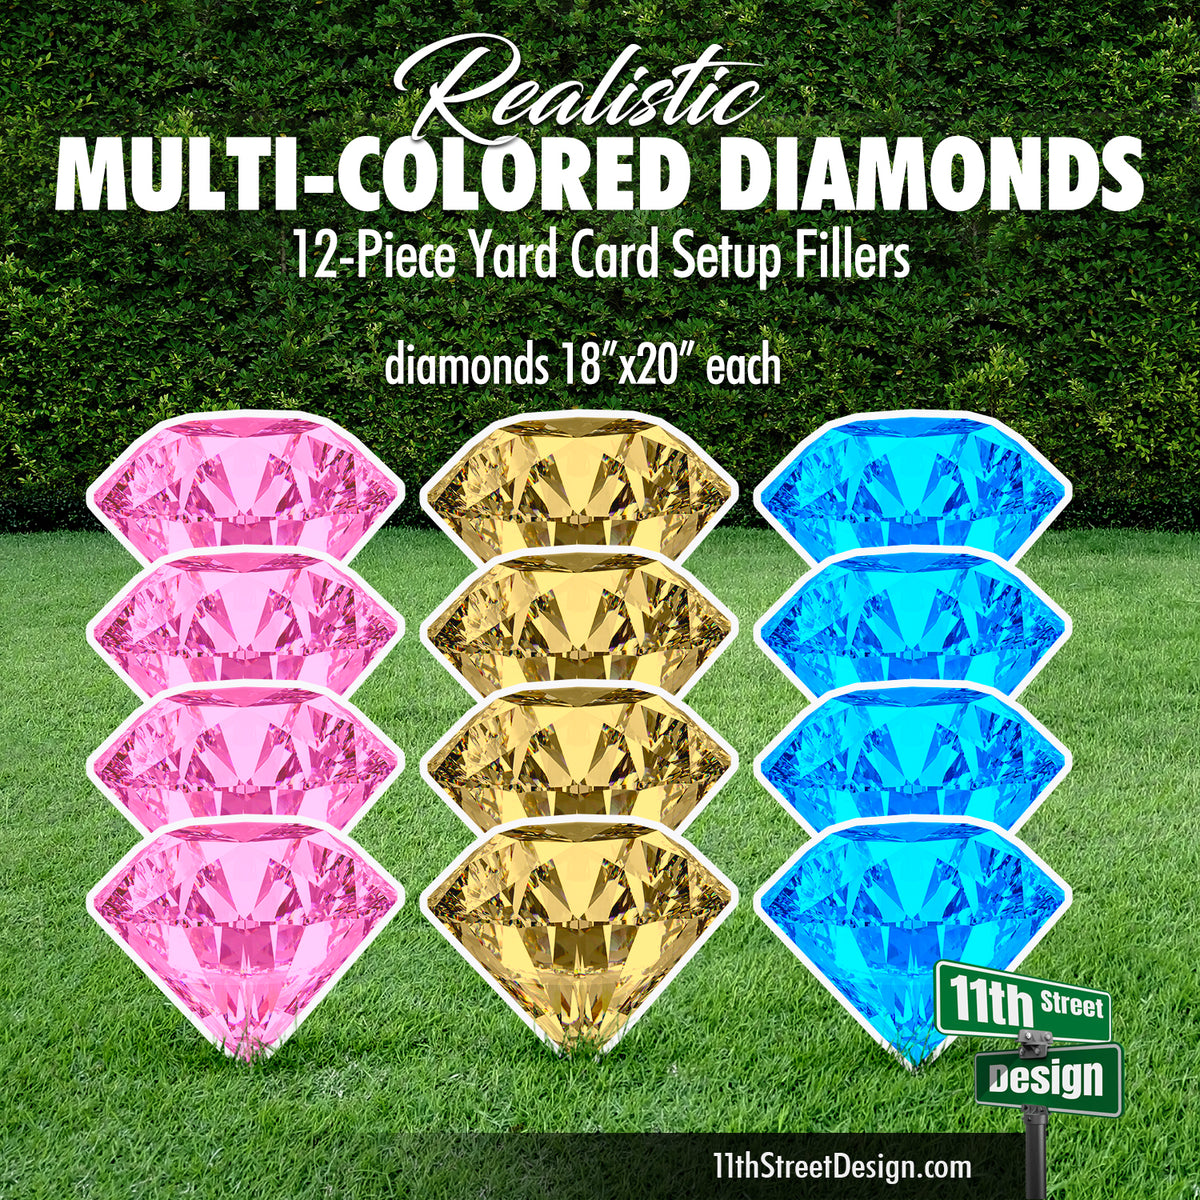 Realistic Colored Diamonds Pink Baby Blue Gold - Yard Card Setup Fillers